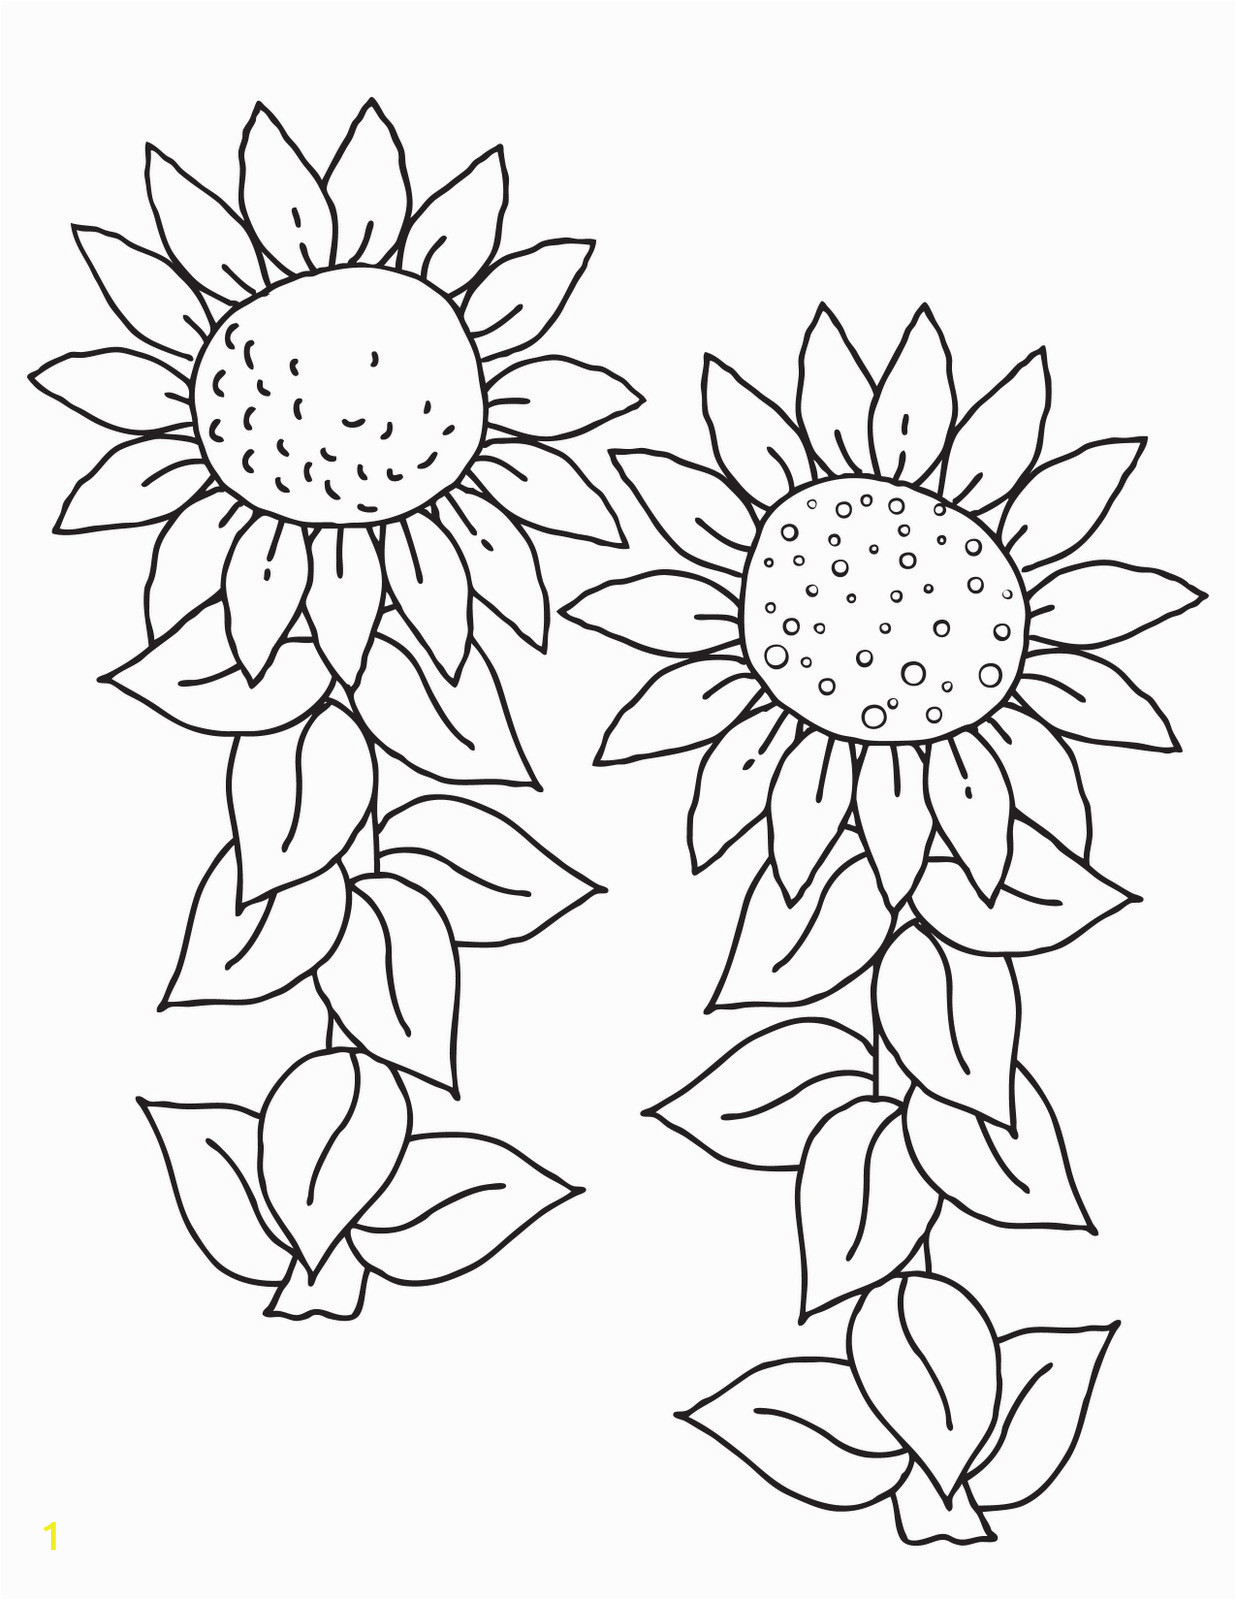 sunflower coloring pages